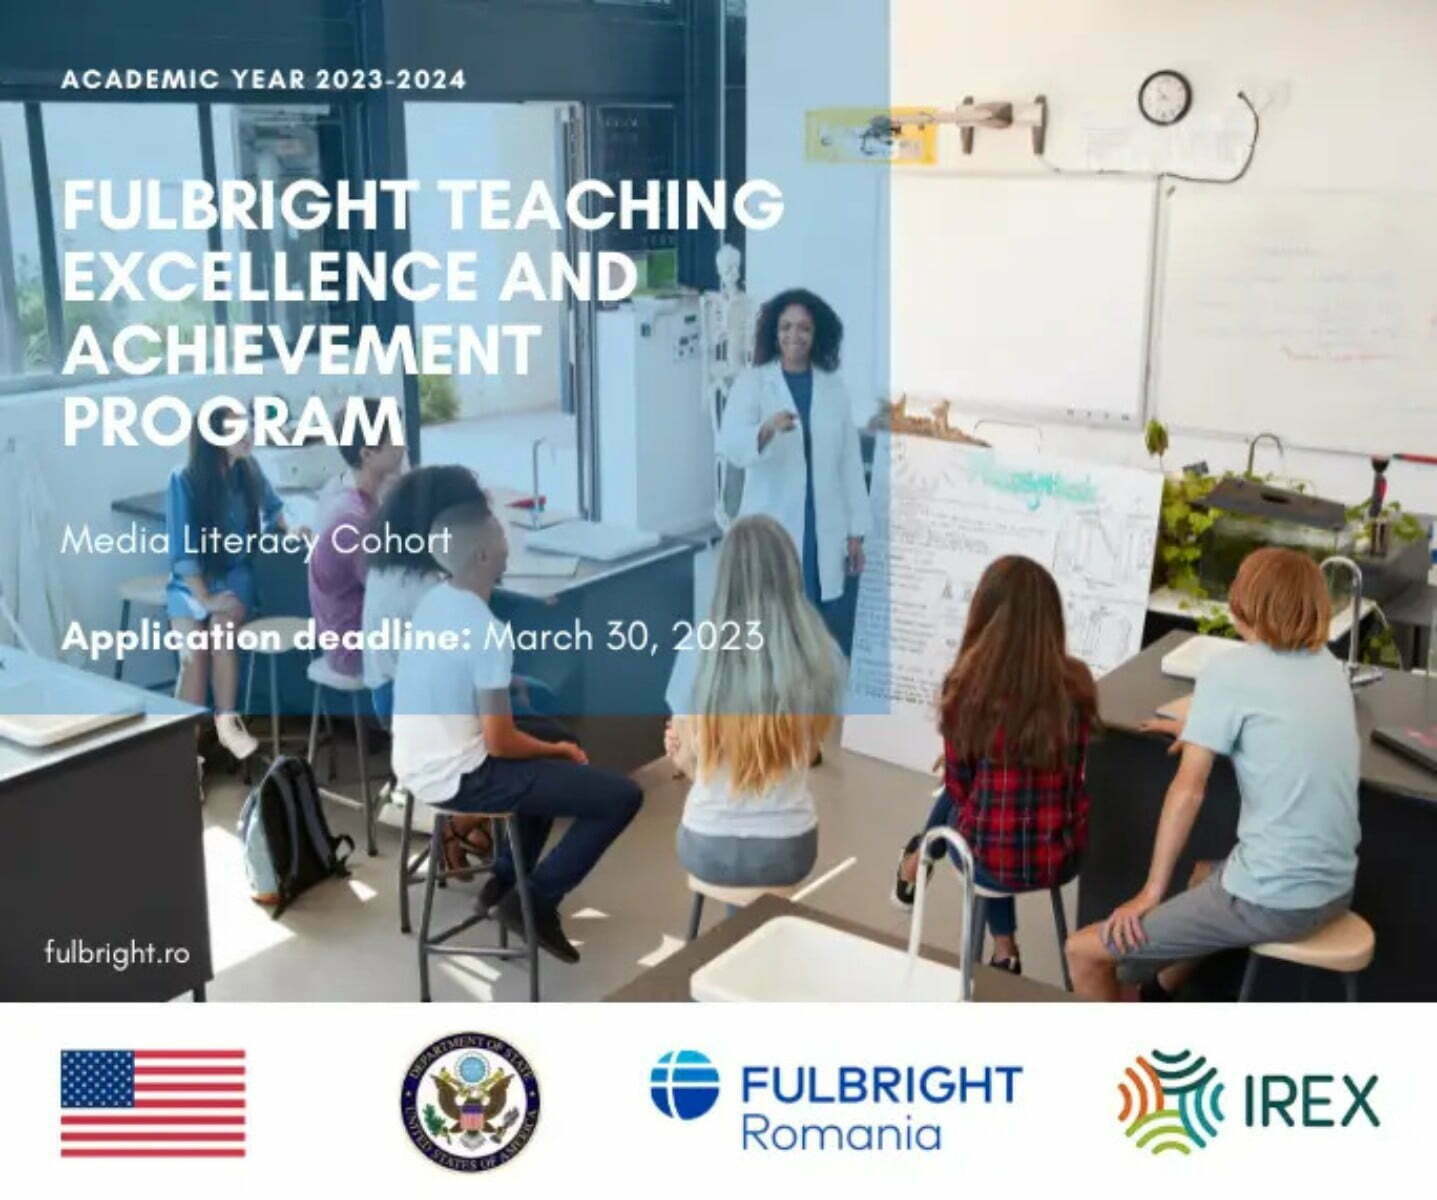 Fulbright Teaching Excellence and Achievement Program 2023